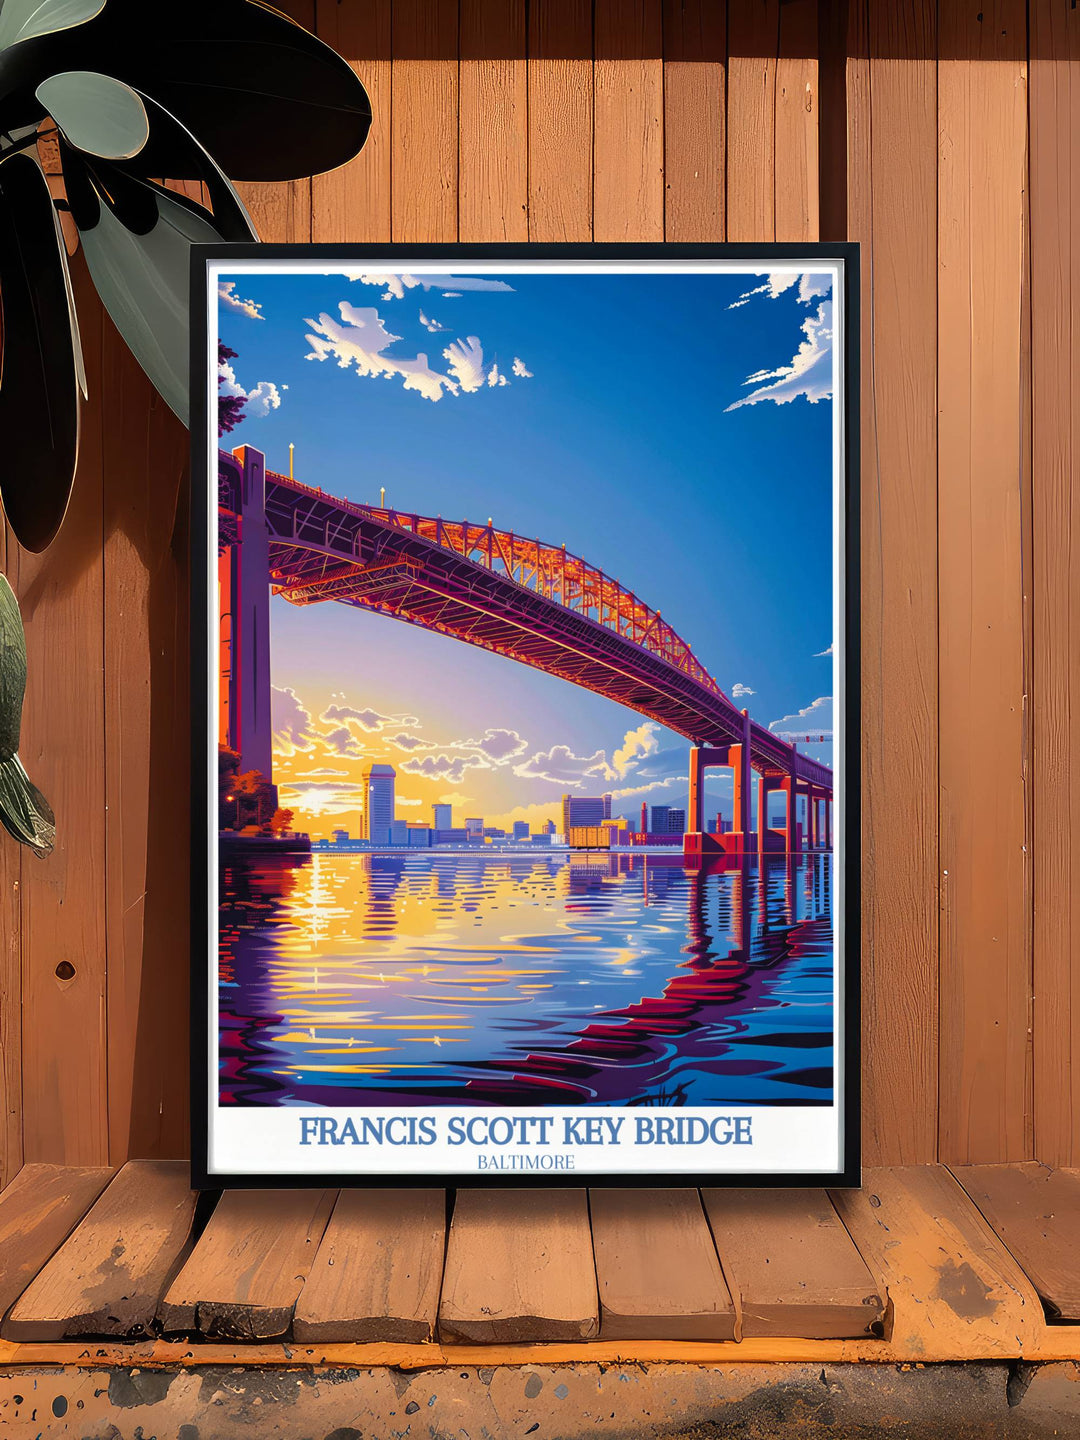 Maryland Art Work featuring a serene morning fog enveloping the Francis Scott Key Bridge, creating a mysterious and captivating travel poster.